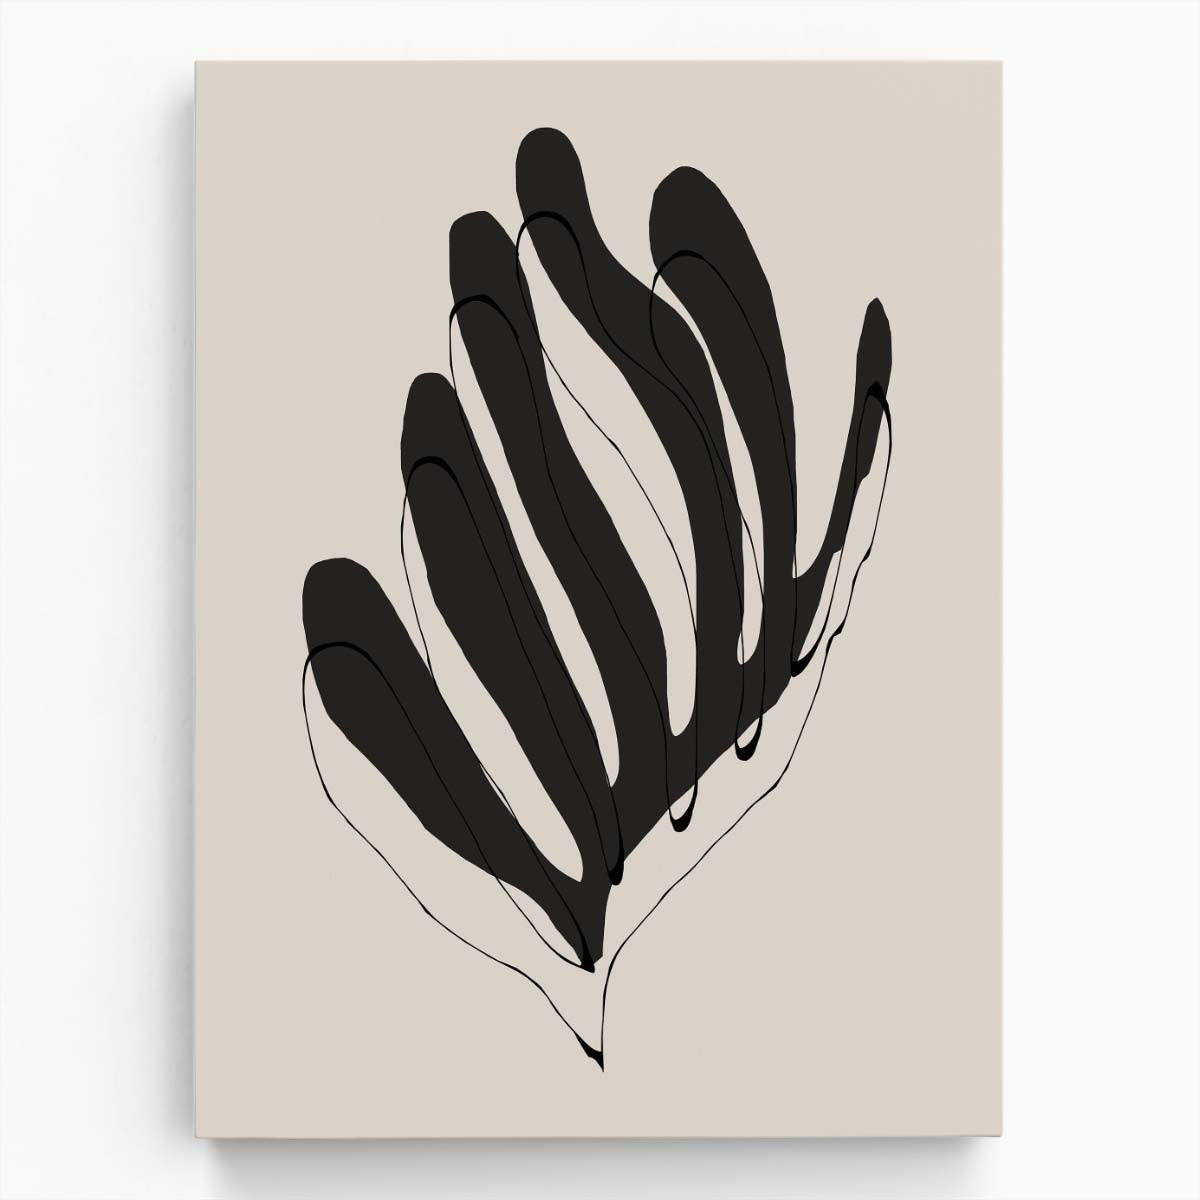 Minimalist Matisse-Inspired Floral Illustration by MIUUS Studio by Luxuriance Designs, made in USA